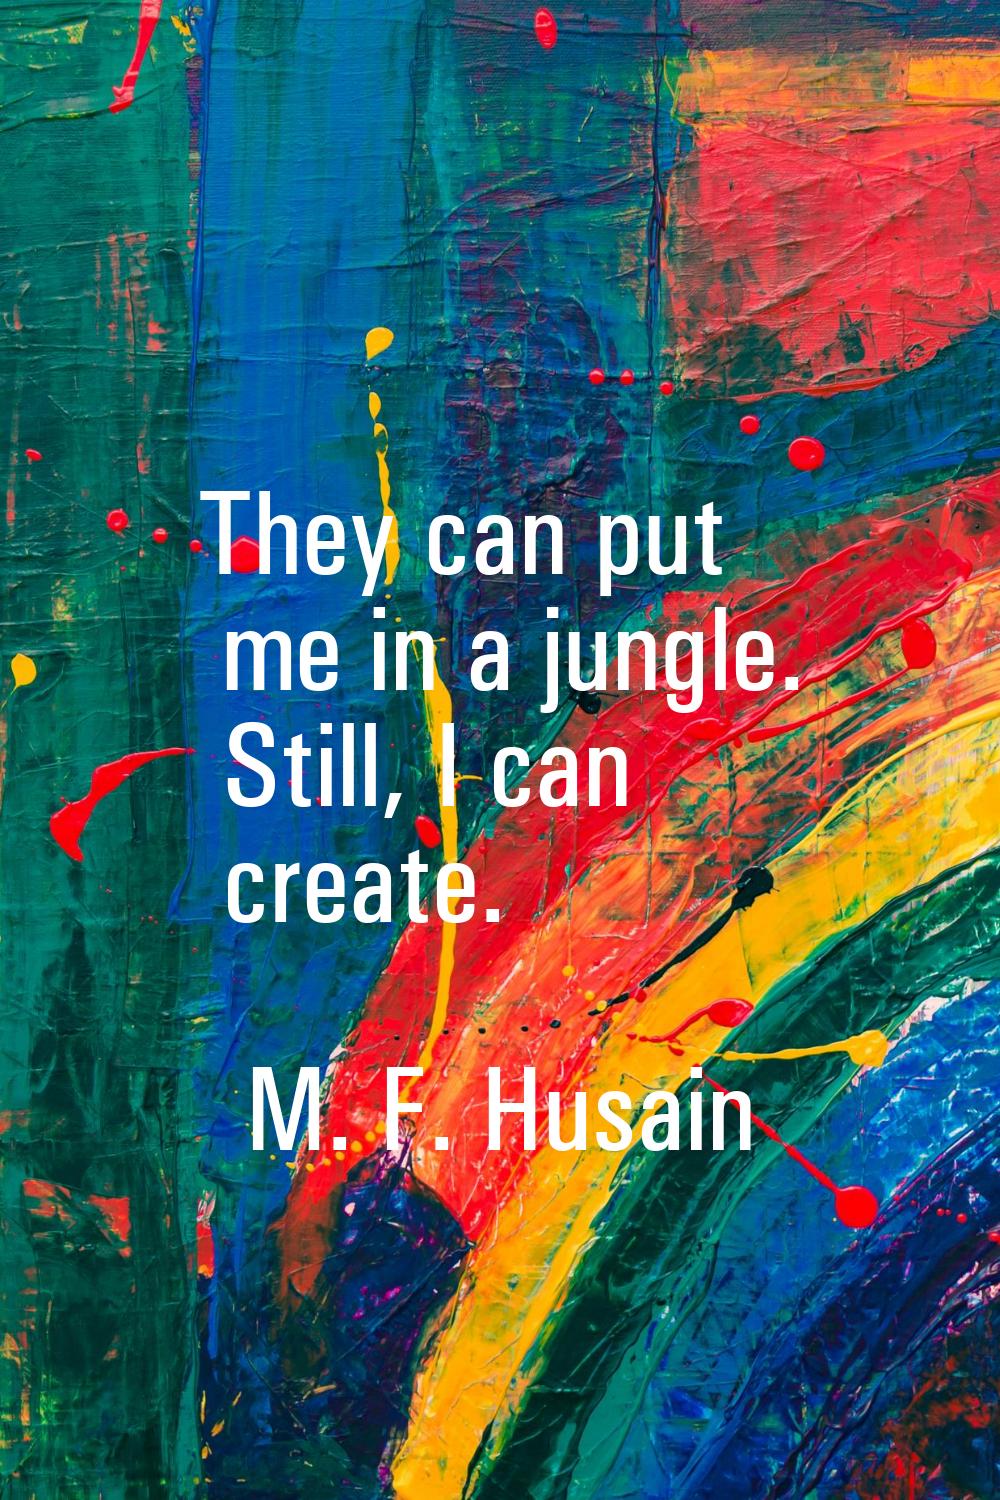 They can put me in a jungle. Still, I can create.